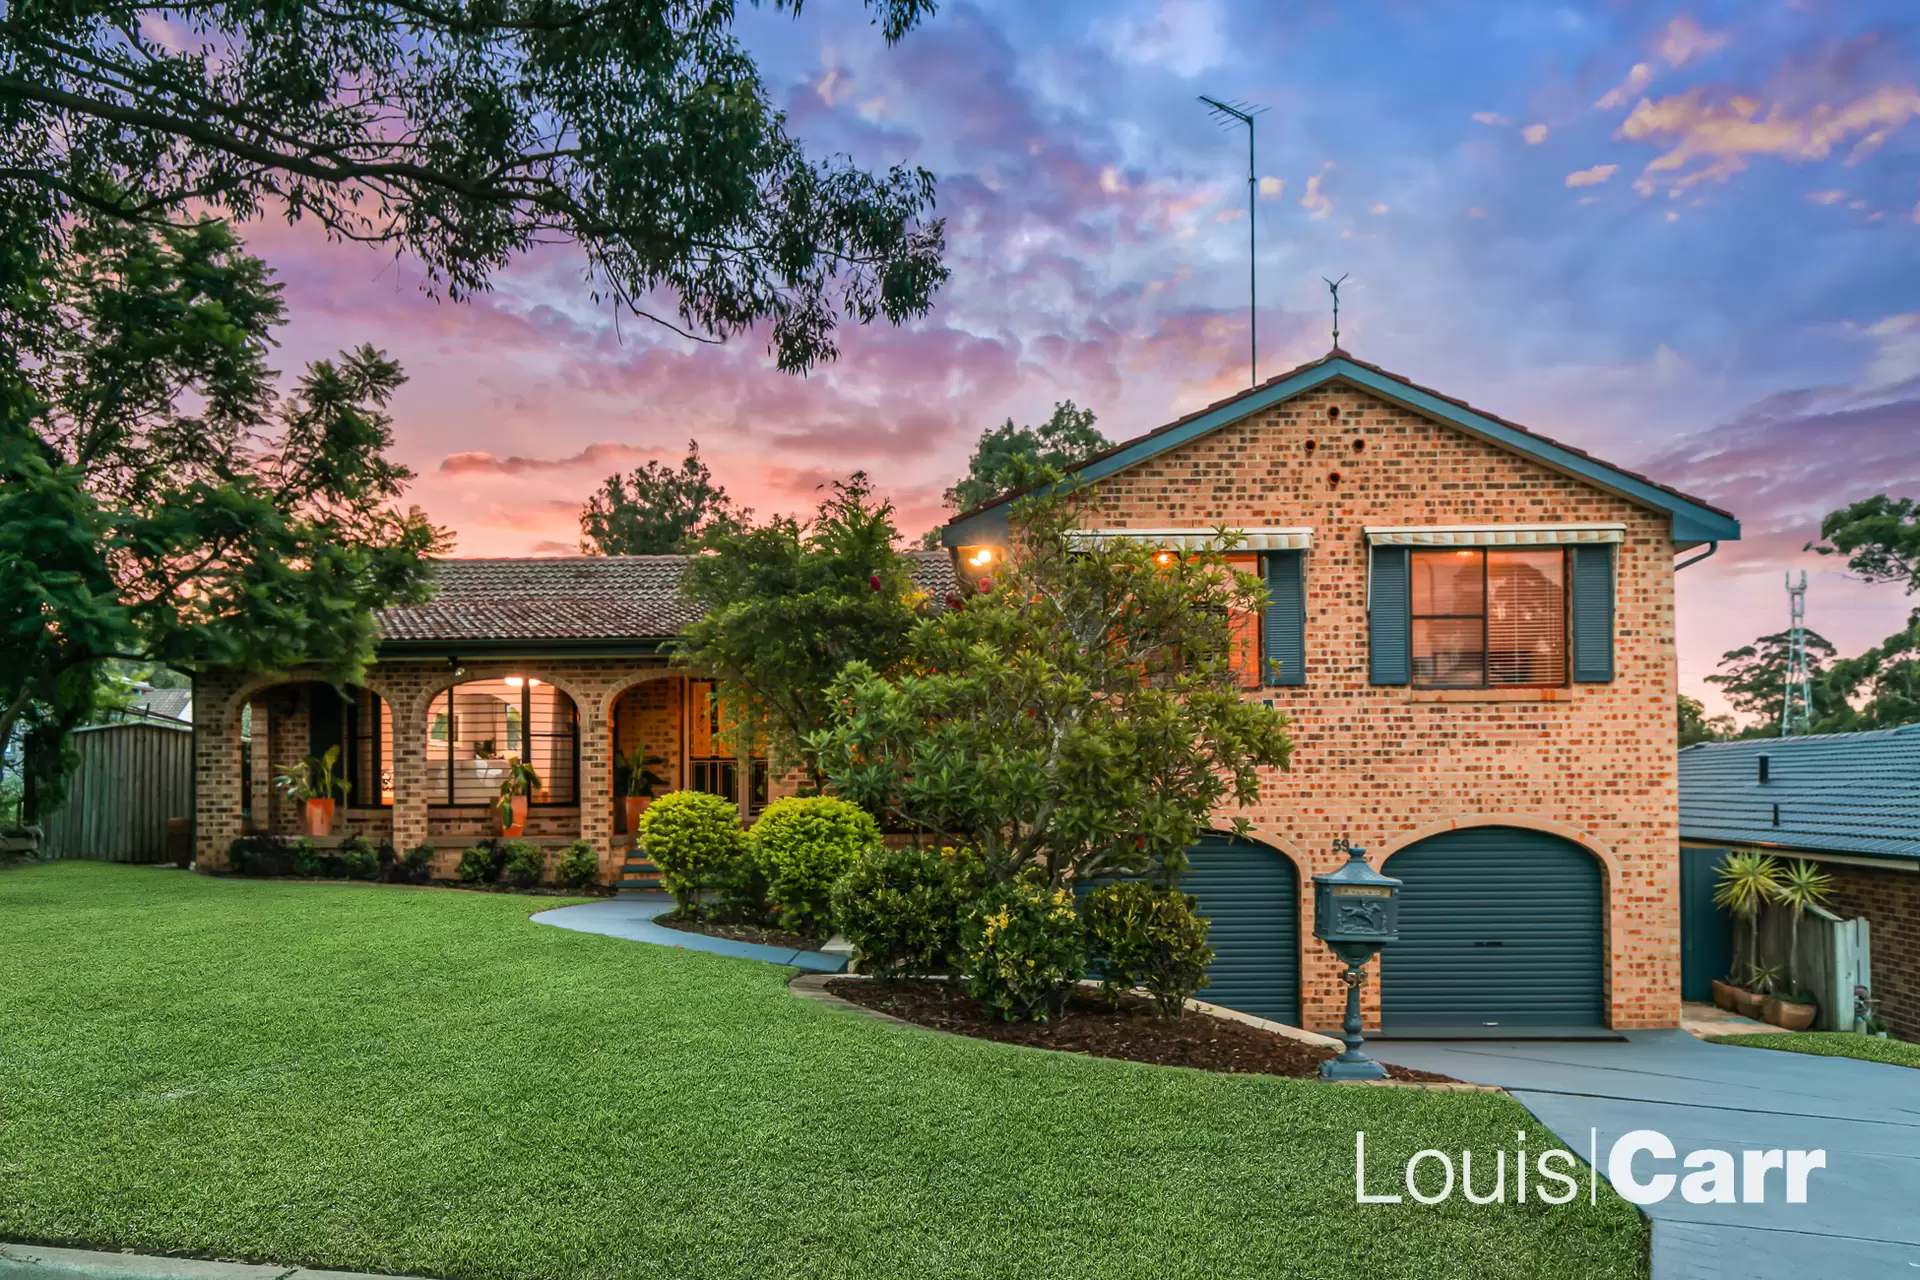 Photo #1: 59 Tallowwood Avenue, Cherrybrook - Sold by Louis Carr Real Estate